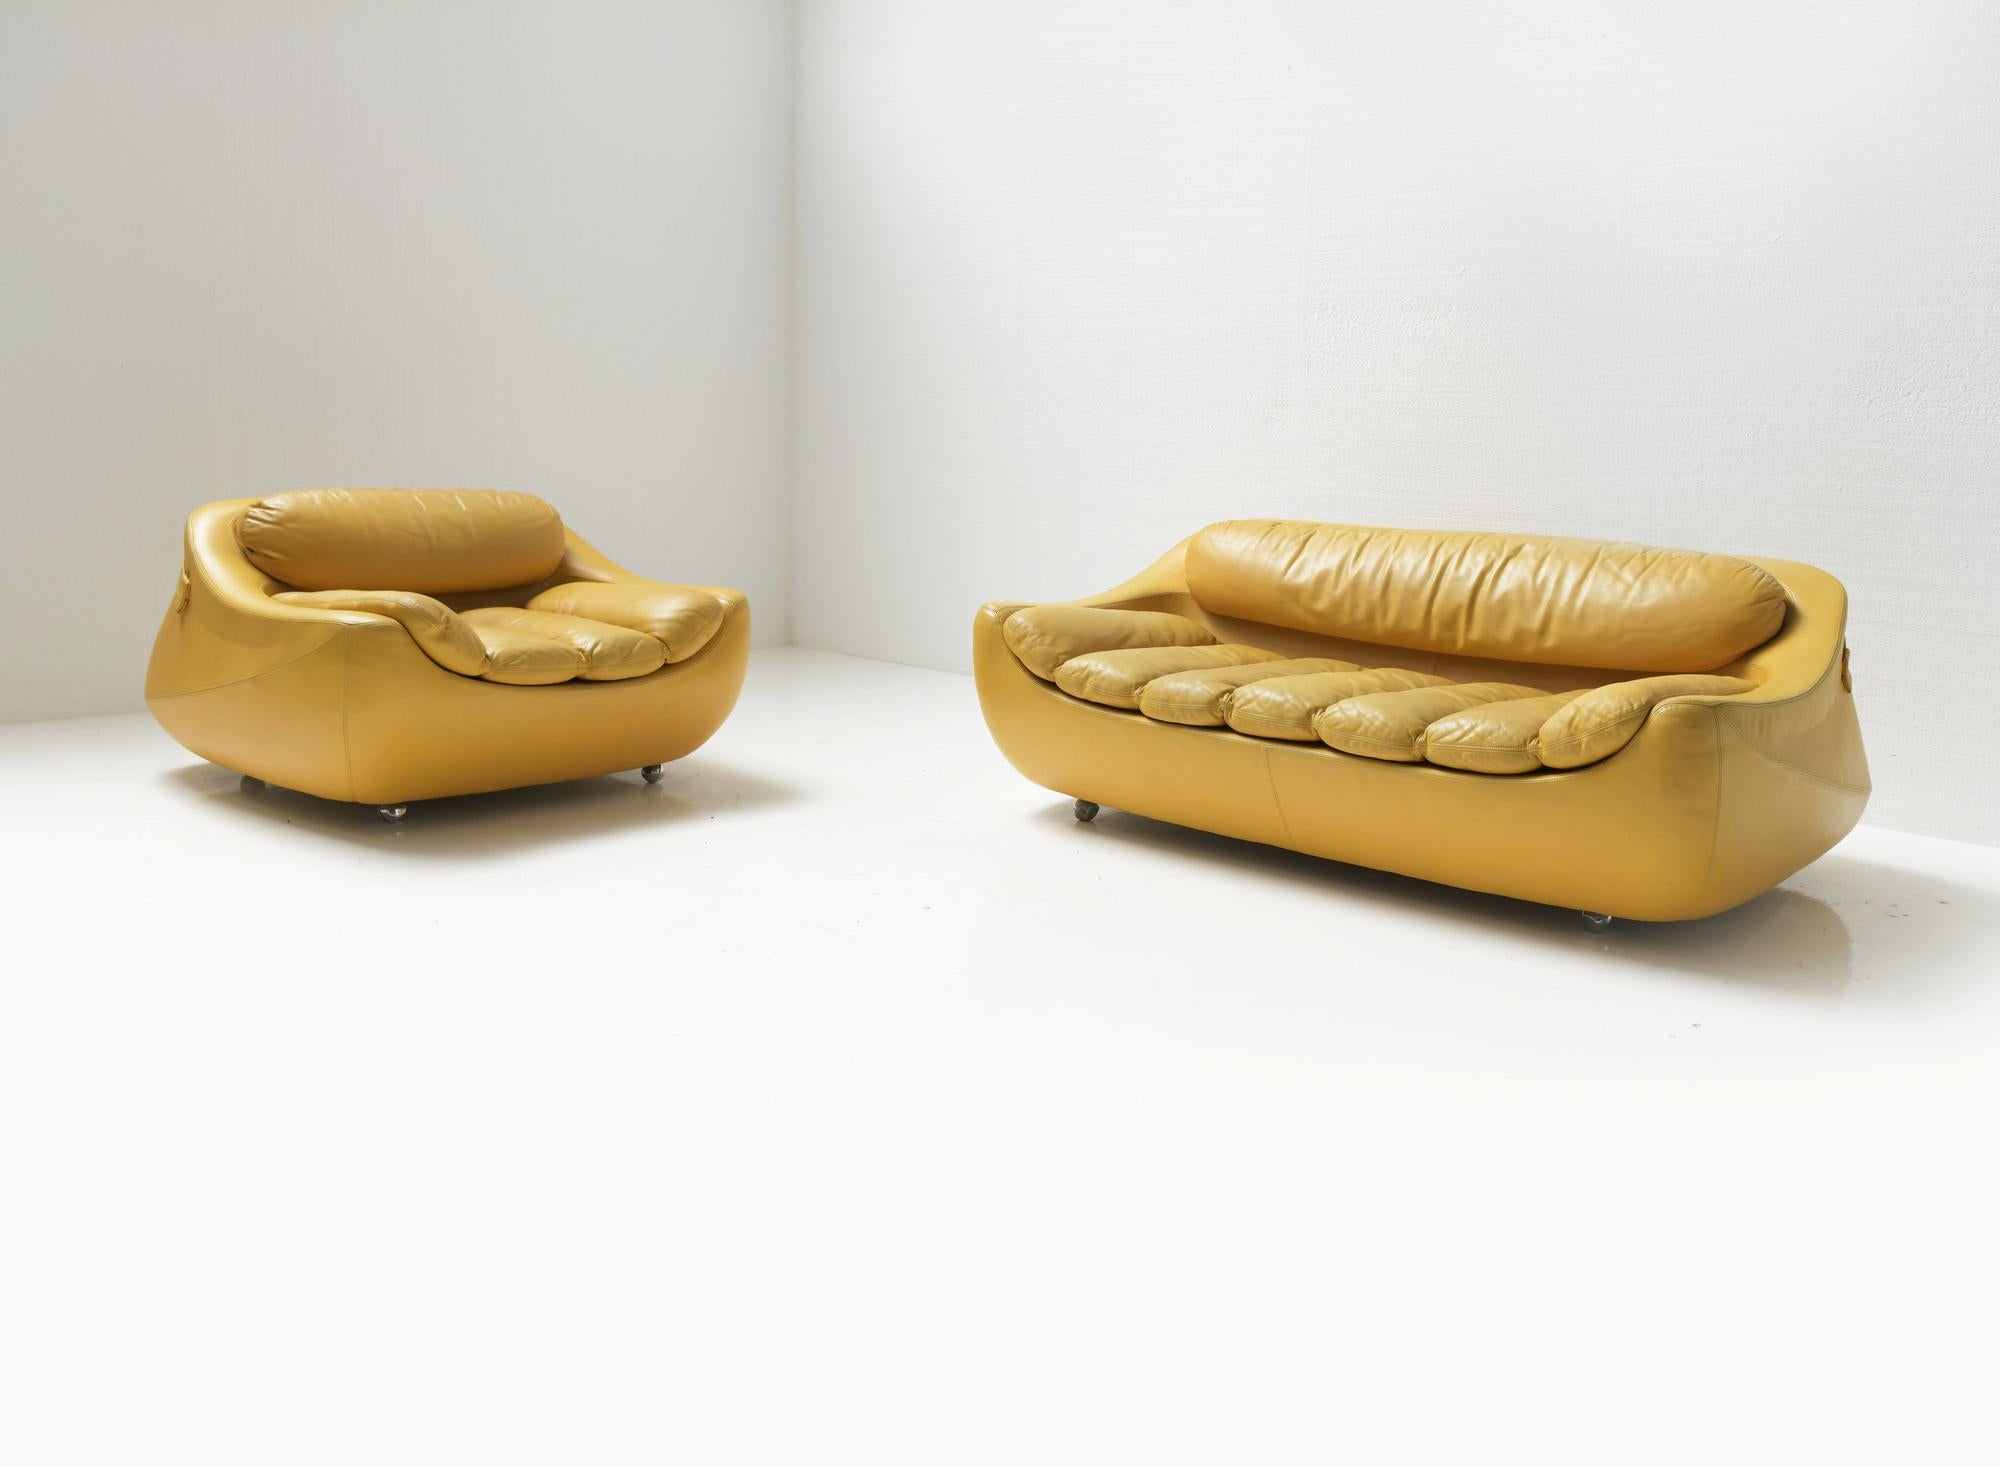 Exceptional rare ‘Carrera’ loungeset.
Designed by Gionathan de Pas, Donato D’Urbino & Paolo Lomazzi and produced by BBB Bonancina, Italy 1969

Stunning shaped low sofa’s. Still in their original yellow leather.
Mint vintage condition.

Only